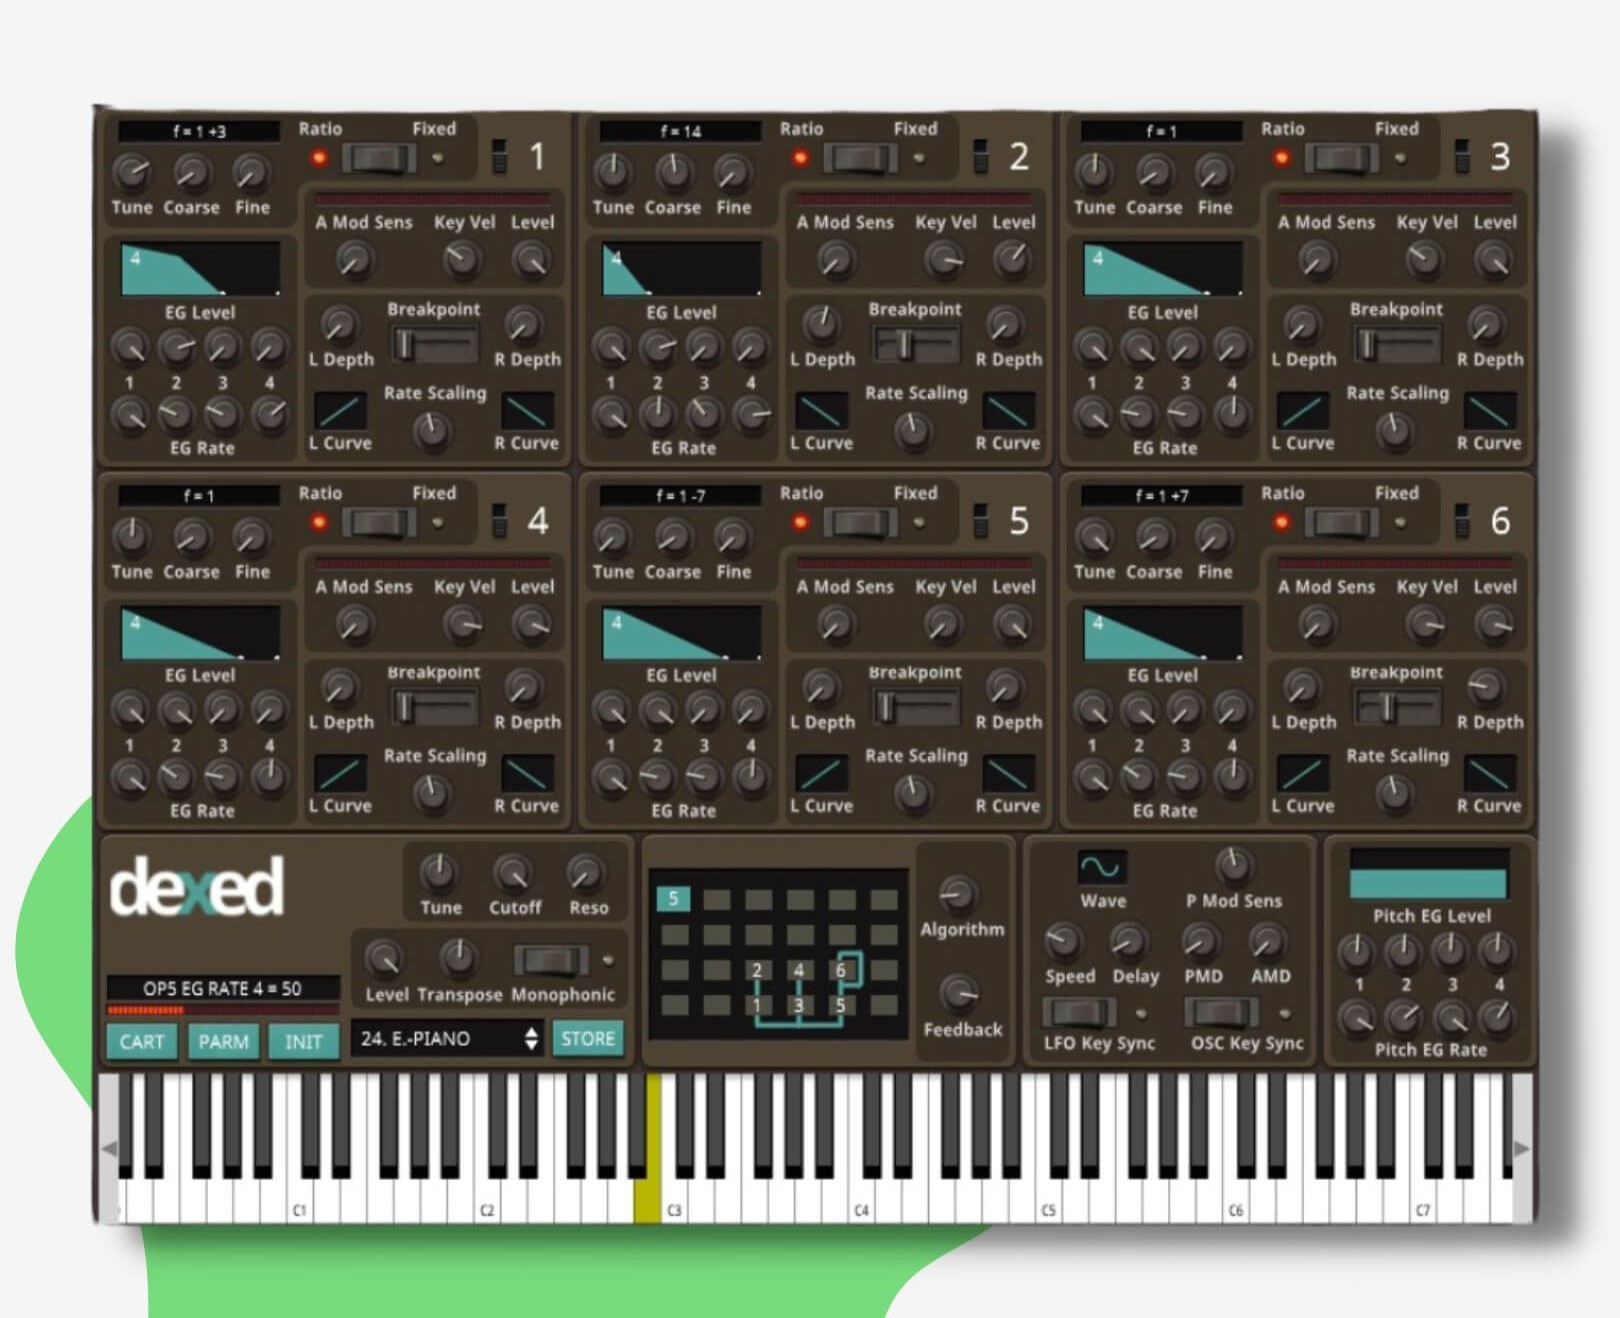 While wavetable synthesis has Vital, Dexed is easily the best free FM software synthesizer around today. It’s actually a comprehensive emulation of the Yamaha DX7 – the classic digital FM synthesizer. As a matter of fact, you can use the Dexed software as an editor for the DX7 hardware synth itself.